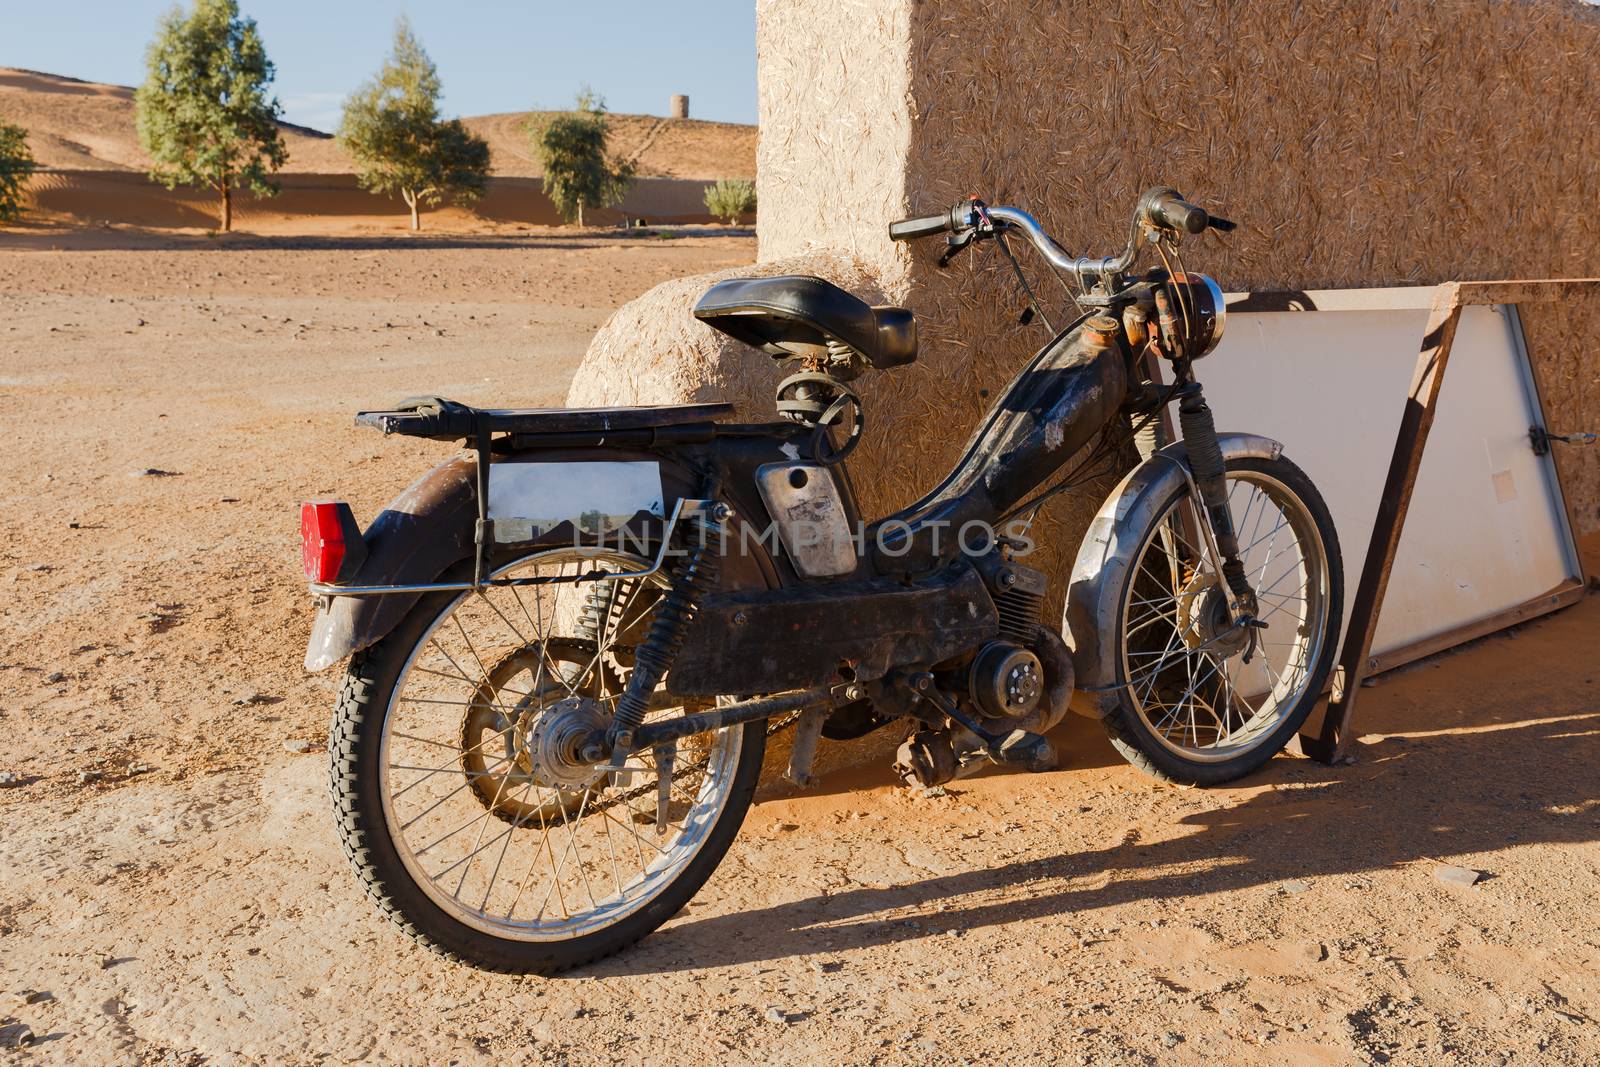 Vintage 60s French Moped Or Scooter, sahara desert Morocco